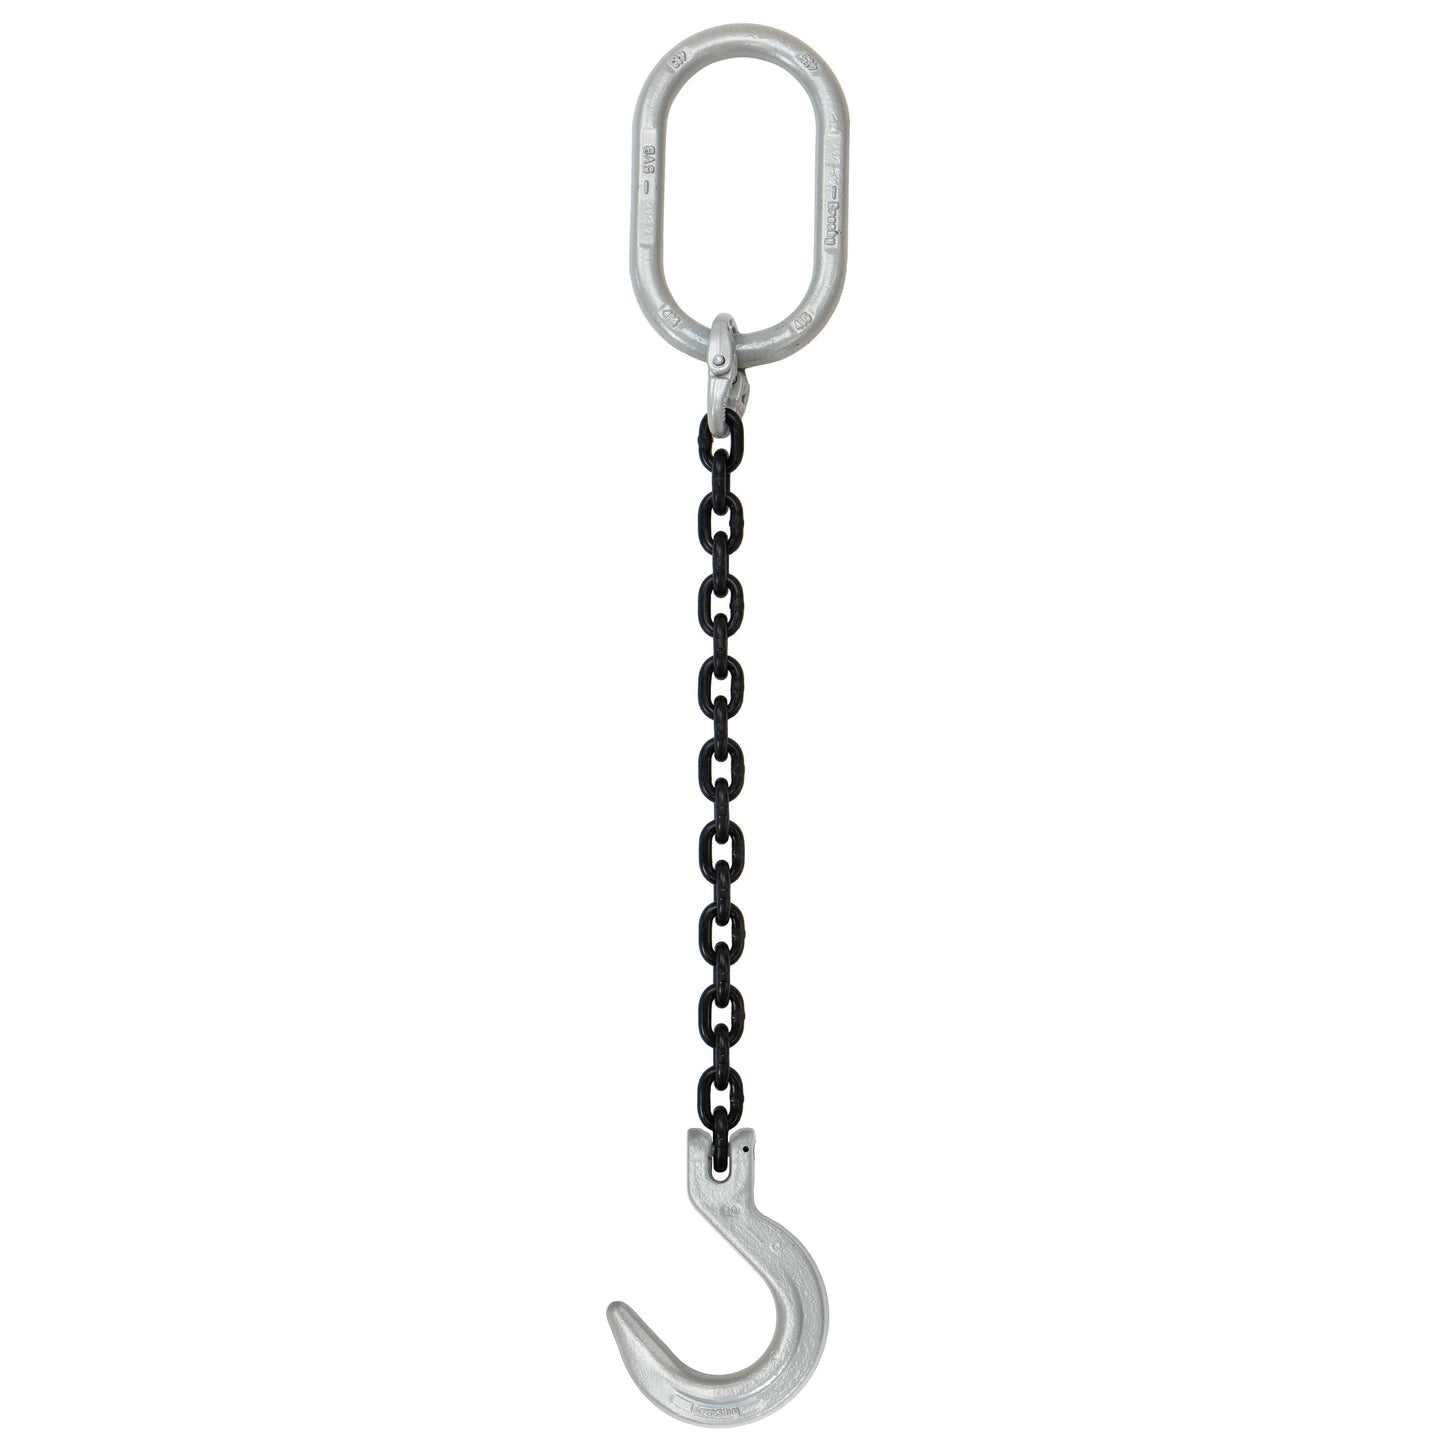 12 inch x 4 foot Domestic Single Leg Chain Sling w Crosby Foundry Hook Grade 100 image 1 of 2